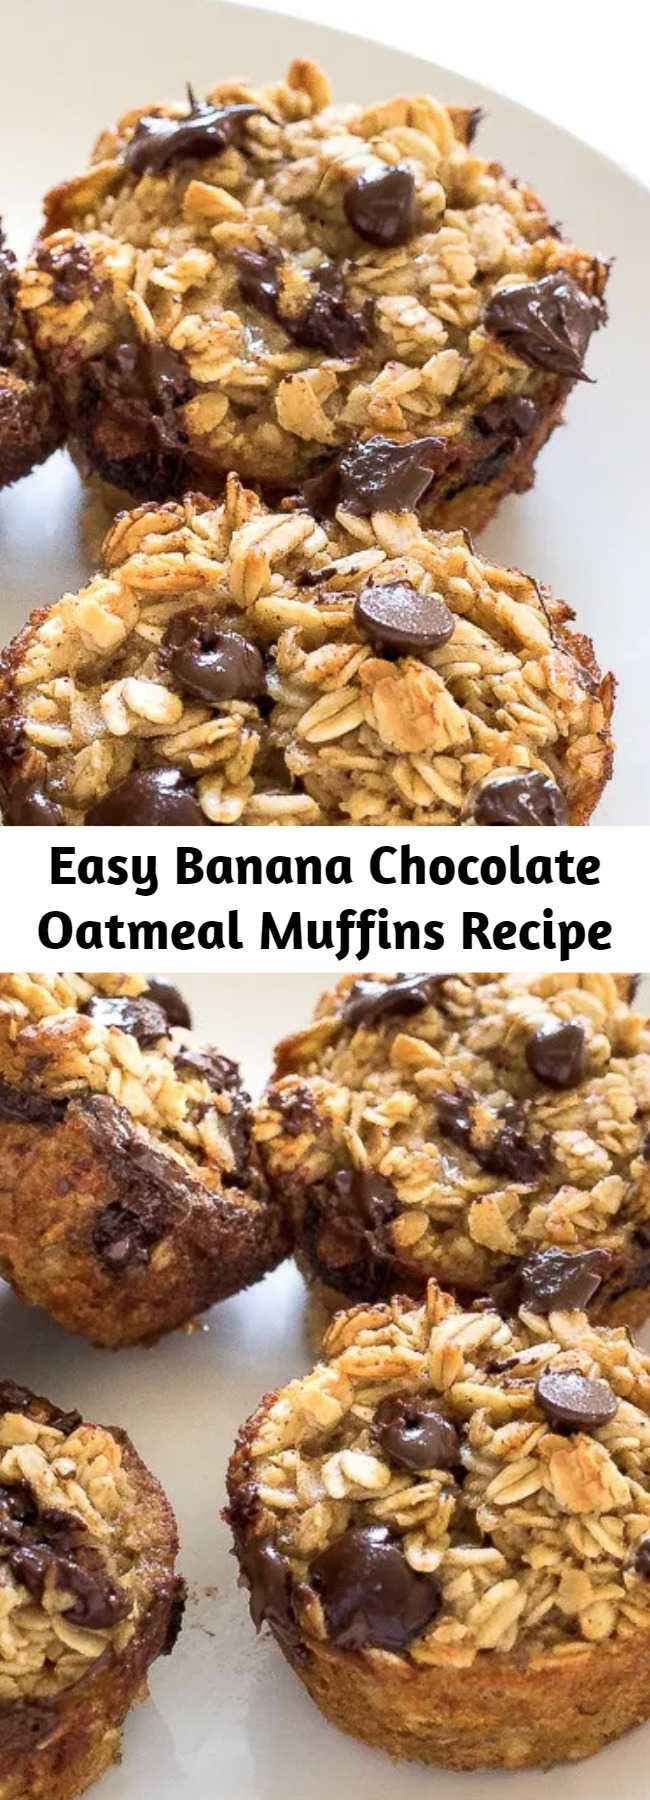 Easy Banana Chocolate Oatmeal Muffins Recipe - Healthy Banana Chocolate Chip Oatmeal Muffins. Made with honey, oats, bananas, coconut oil and chocolate chips! A freezer friendly breakfast or snack!